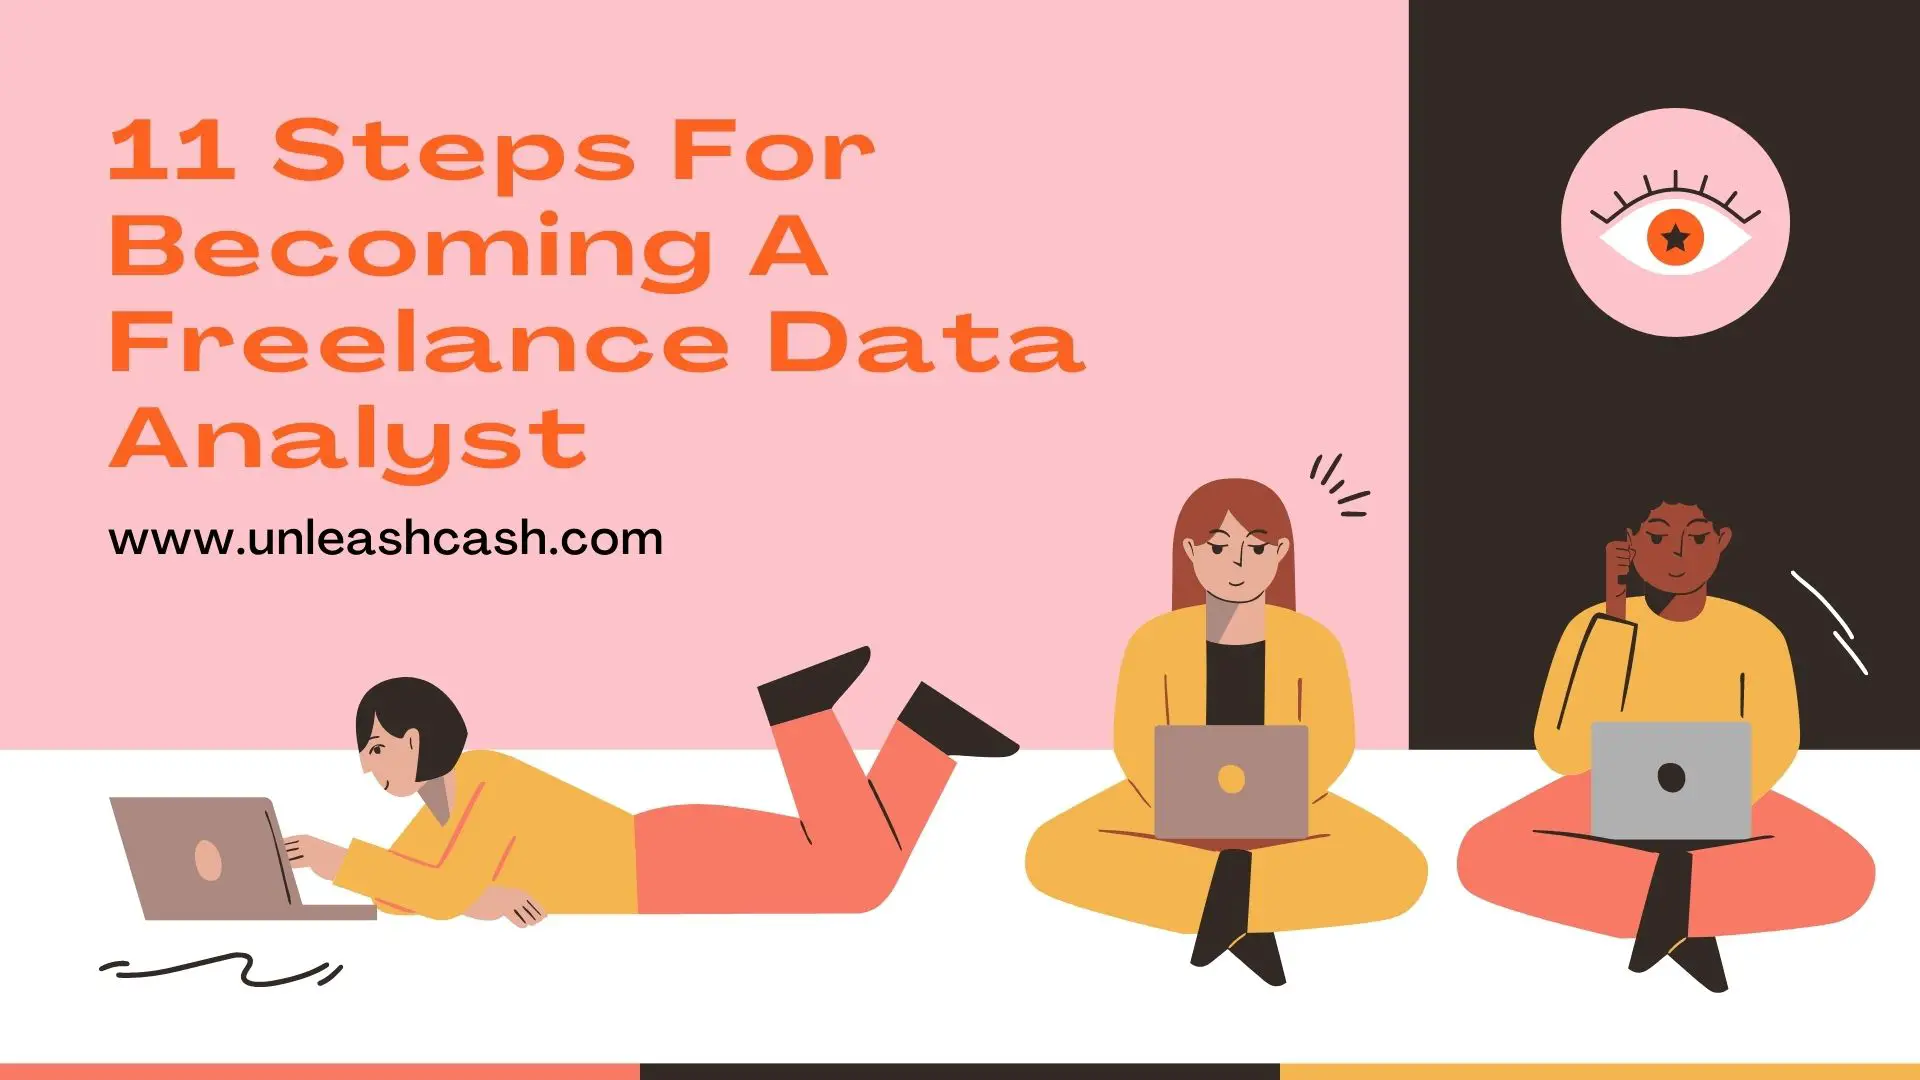 11 Steps For Becoming A Freelance Data Analyst